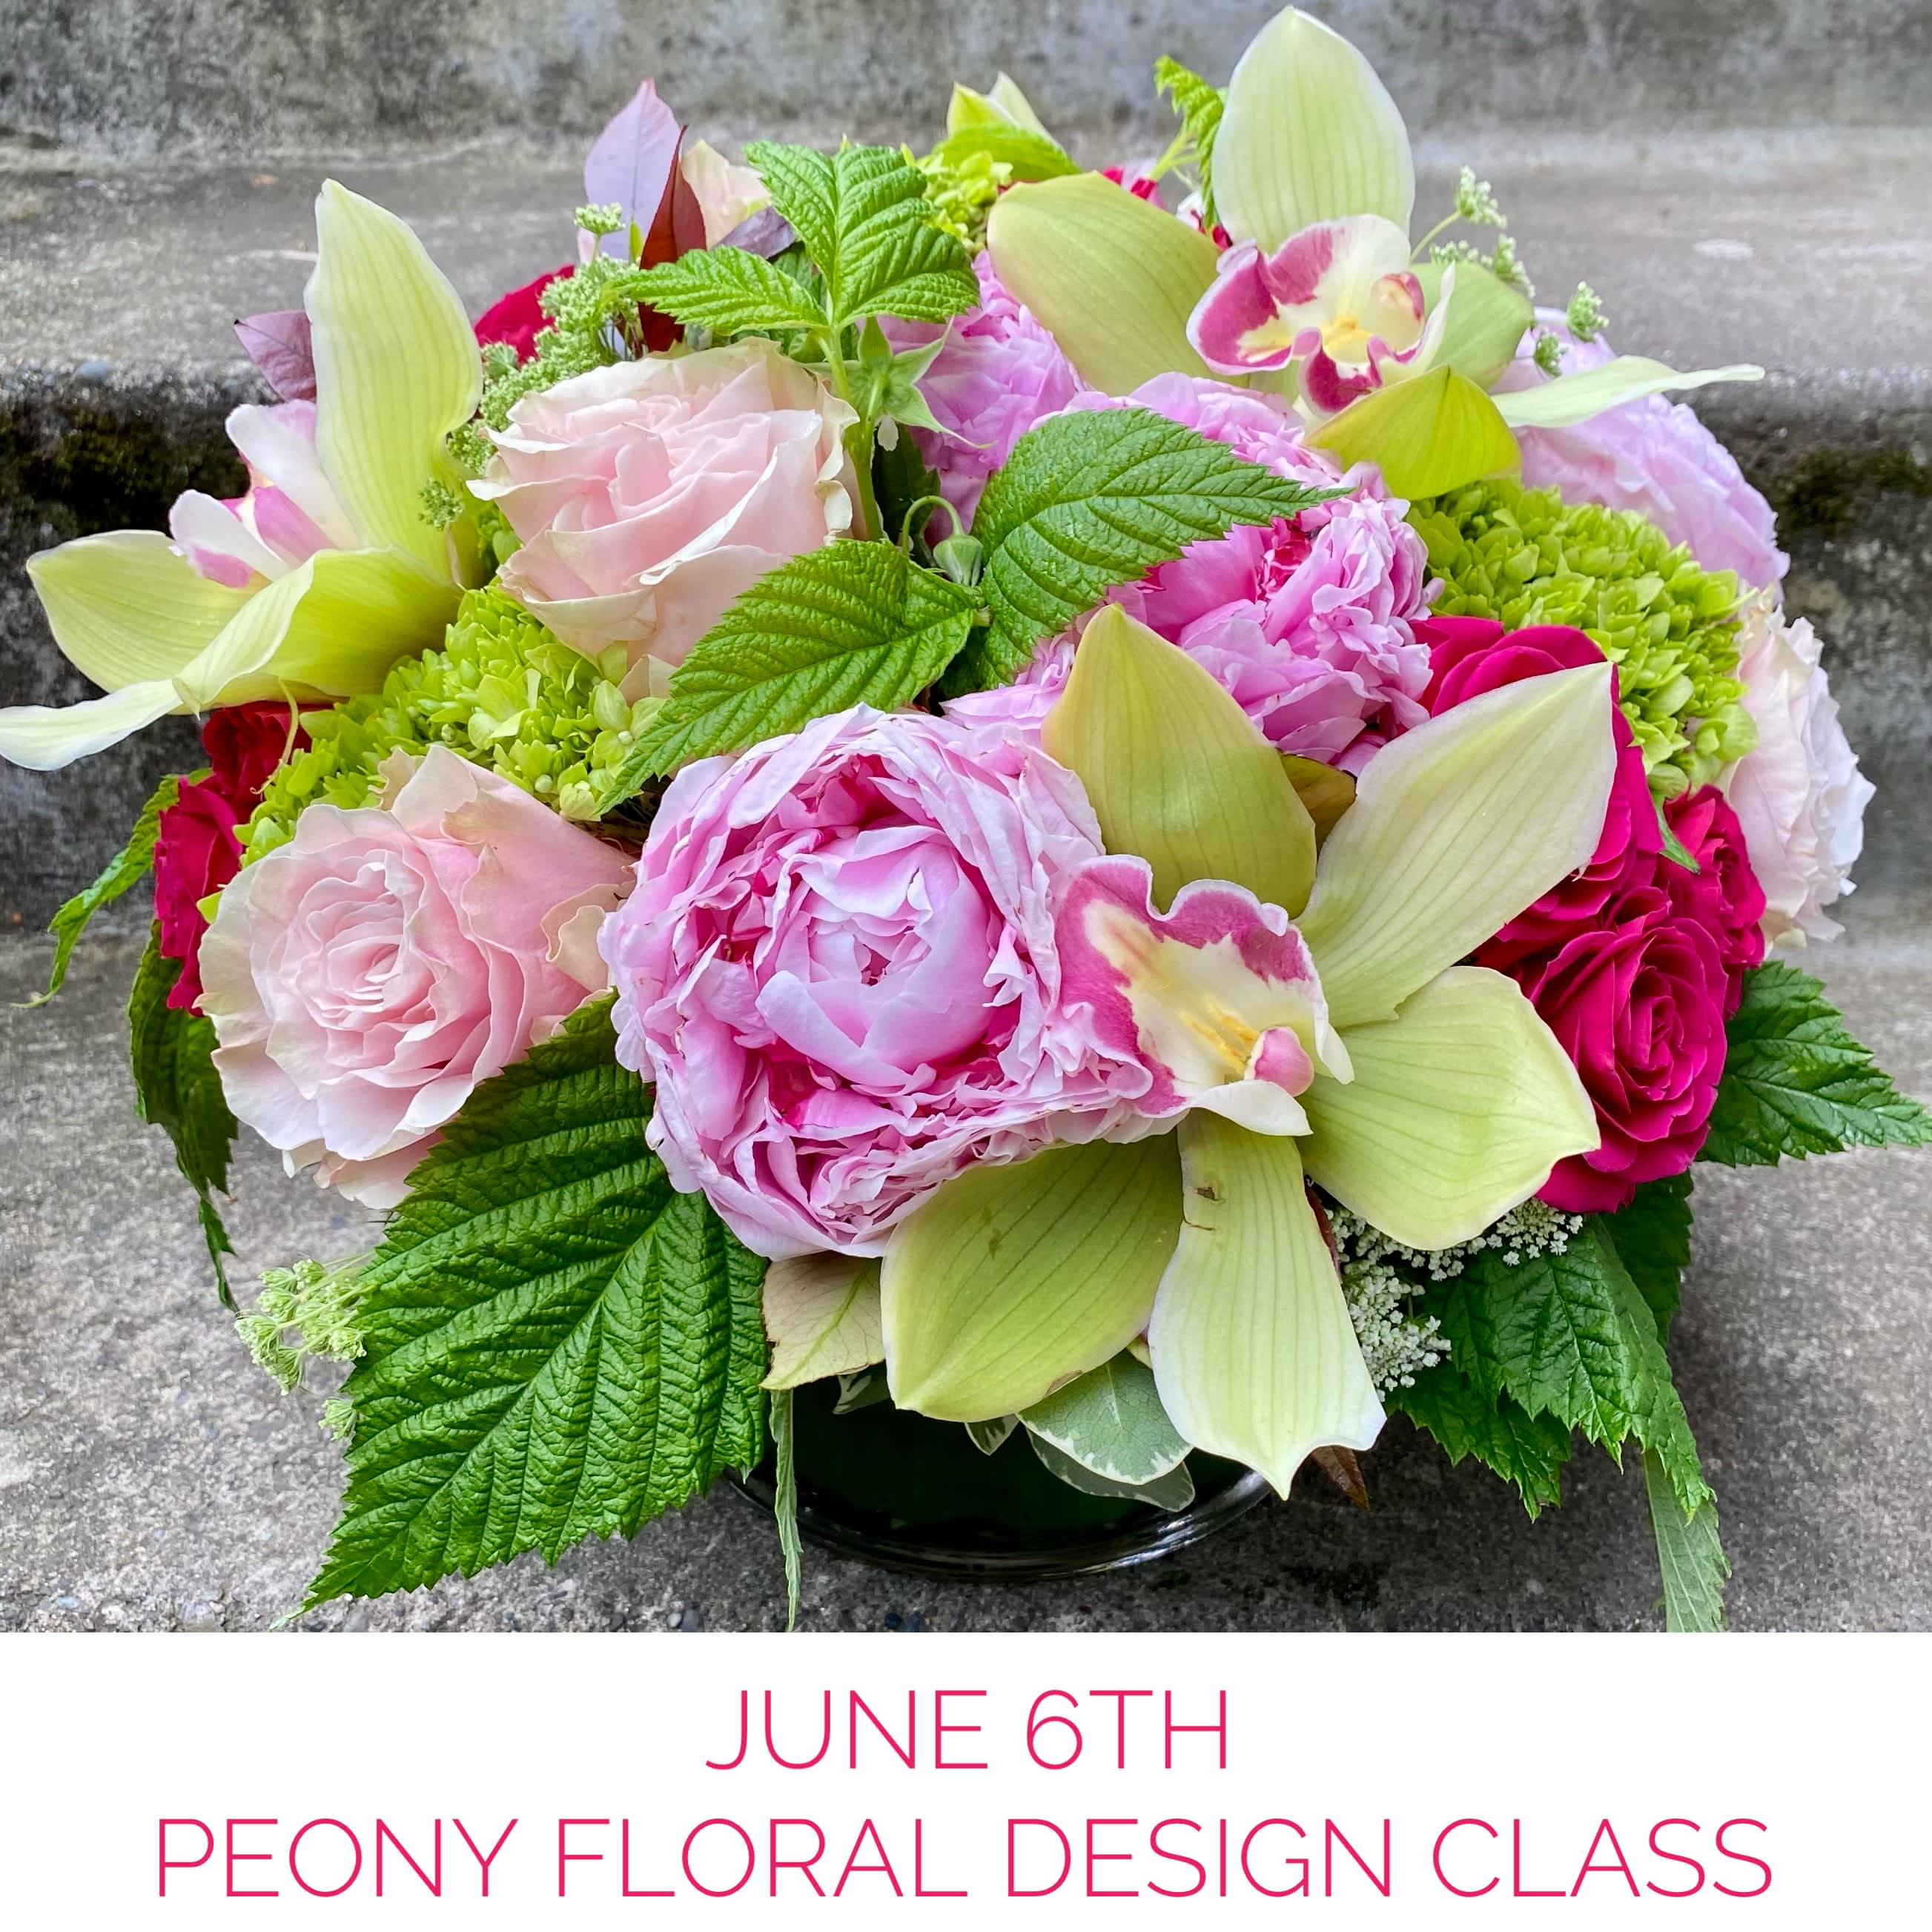 June 6th Peony Floral Design Class - Learn new floral design skills with our fun workshops in pavé floral design. From beginners to experienced floral designers, there is something for everyone in our classes. We teach how to build the foundation of a floral arrangement, finishing touches as well as tricks of the trade. Students will learn simple secrets and tools that will last a lifetime so that every time they put flowers into a vase they will last longer. At the end of the evening, they take home an Instagram worthy floral arrangement worth $150 that they have created which has a value of $150 along with a gift bag of tools worth $25 to that will make it even easier create beautiful florals at home.  We were the first florist in Seattle to teach floral design classes in our studio. Our first class was the result of a customer who wanted to throw herself a fun birthday party and asked if we would put on a class for her and a few friends. That was in 2007, and since then hundreds of students have taken our classes and learned valuable tips and techniques to create beautiful and long-lasting arrangements. Our methods are simple, and the techniques are easy to put into use in most styles of floral design. Many of our students have gone on to pursue a career in floral design, while others have put their new skills to use creating beautiful arrangements for personal enjoyment and as gifts.  The classes follow the season, beginning with spring Flowers featuring tulips, followed by designing with peonies then dahlias and finish with fall florals. In addition to the classes in pavé floral design, we offer classes sharing how we create our wildly popular, award-winning texture boxes as well as a class in holiday wreath decorating.  Classes are taught in our studio on the north side of Green Lake. They begin at 6:00 pm and end around 9:30. Students are welcome to stay after class to ask questions or take photographs of their arrangement with our studio lighting. Registration is limited to eight students per class.  It is always more fun to learn with a friend. Select the deluxe version to register with one friend or premium to register with two friends and you will each save $10. Be sure to include the names of who you are registering in the “Special Instructions” section during checkout so that we know who is coming.  Private Classes Or maybe you would like a class for just you and your besties. Check out our Class Information and the Class FAQ pages for details on how to book a private class. You bring the wine; we will supply the glasses and a really fun time! Private classes are great for team building events, baby and bridal showers, birthday parties and holiday parties.  Gift Certificates We offer gift certificates for our classes. Let us know in the &quot;Special Instructions&quot; section at checkout that you would like a gift certificate for this class and include the name, phone number and email of the recipient so that we can keep them in the loop about the class. You can also call us to buy a gift certificate that is good for any class.  Registration Purchasing this item is registering for this specific class. The deluxe version is registration for two people for this class and the premium version registers three people for this class. So that you do not have to pay a delivery charge, checkout defaults to in-store pick up. Be sure to use June 6th, 2024, as the pick-up date. Classes begin at 6 pm but you will be requested to select a time window for pick-up during checkout. Please use 3:00 to 5:00, even though the class begins at 6:00 pm. Of course, we would love to talk with you when you register so feel free to give us a call at (206) 329-3944.